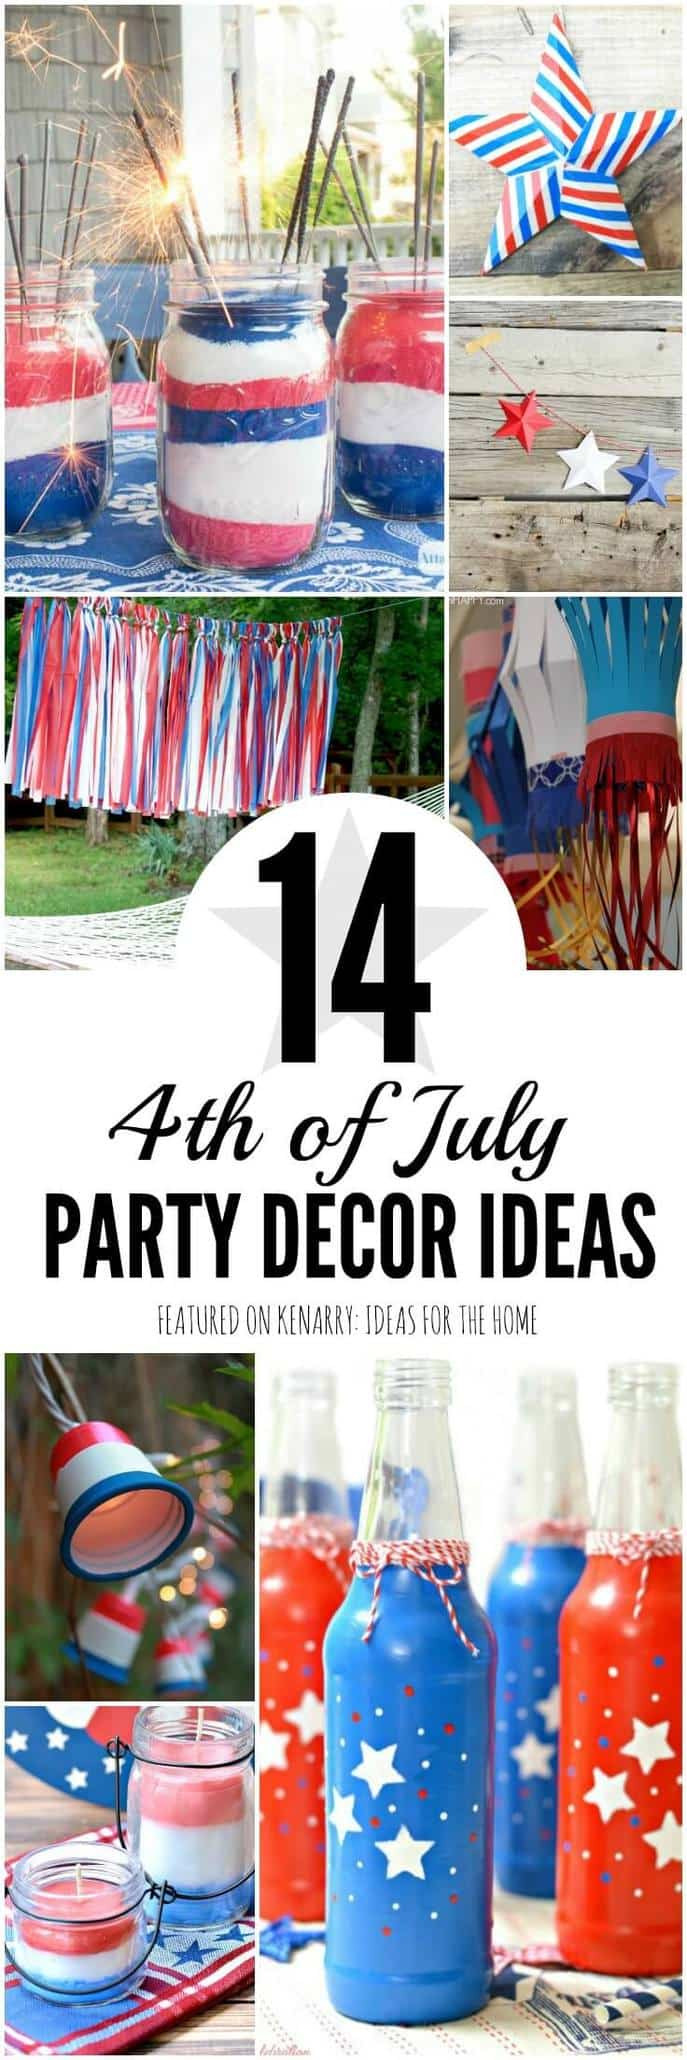 4Th Of July Backyard Party Ideas
 4th of July Party 14 Ideas to Decorate Your Backyard